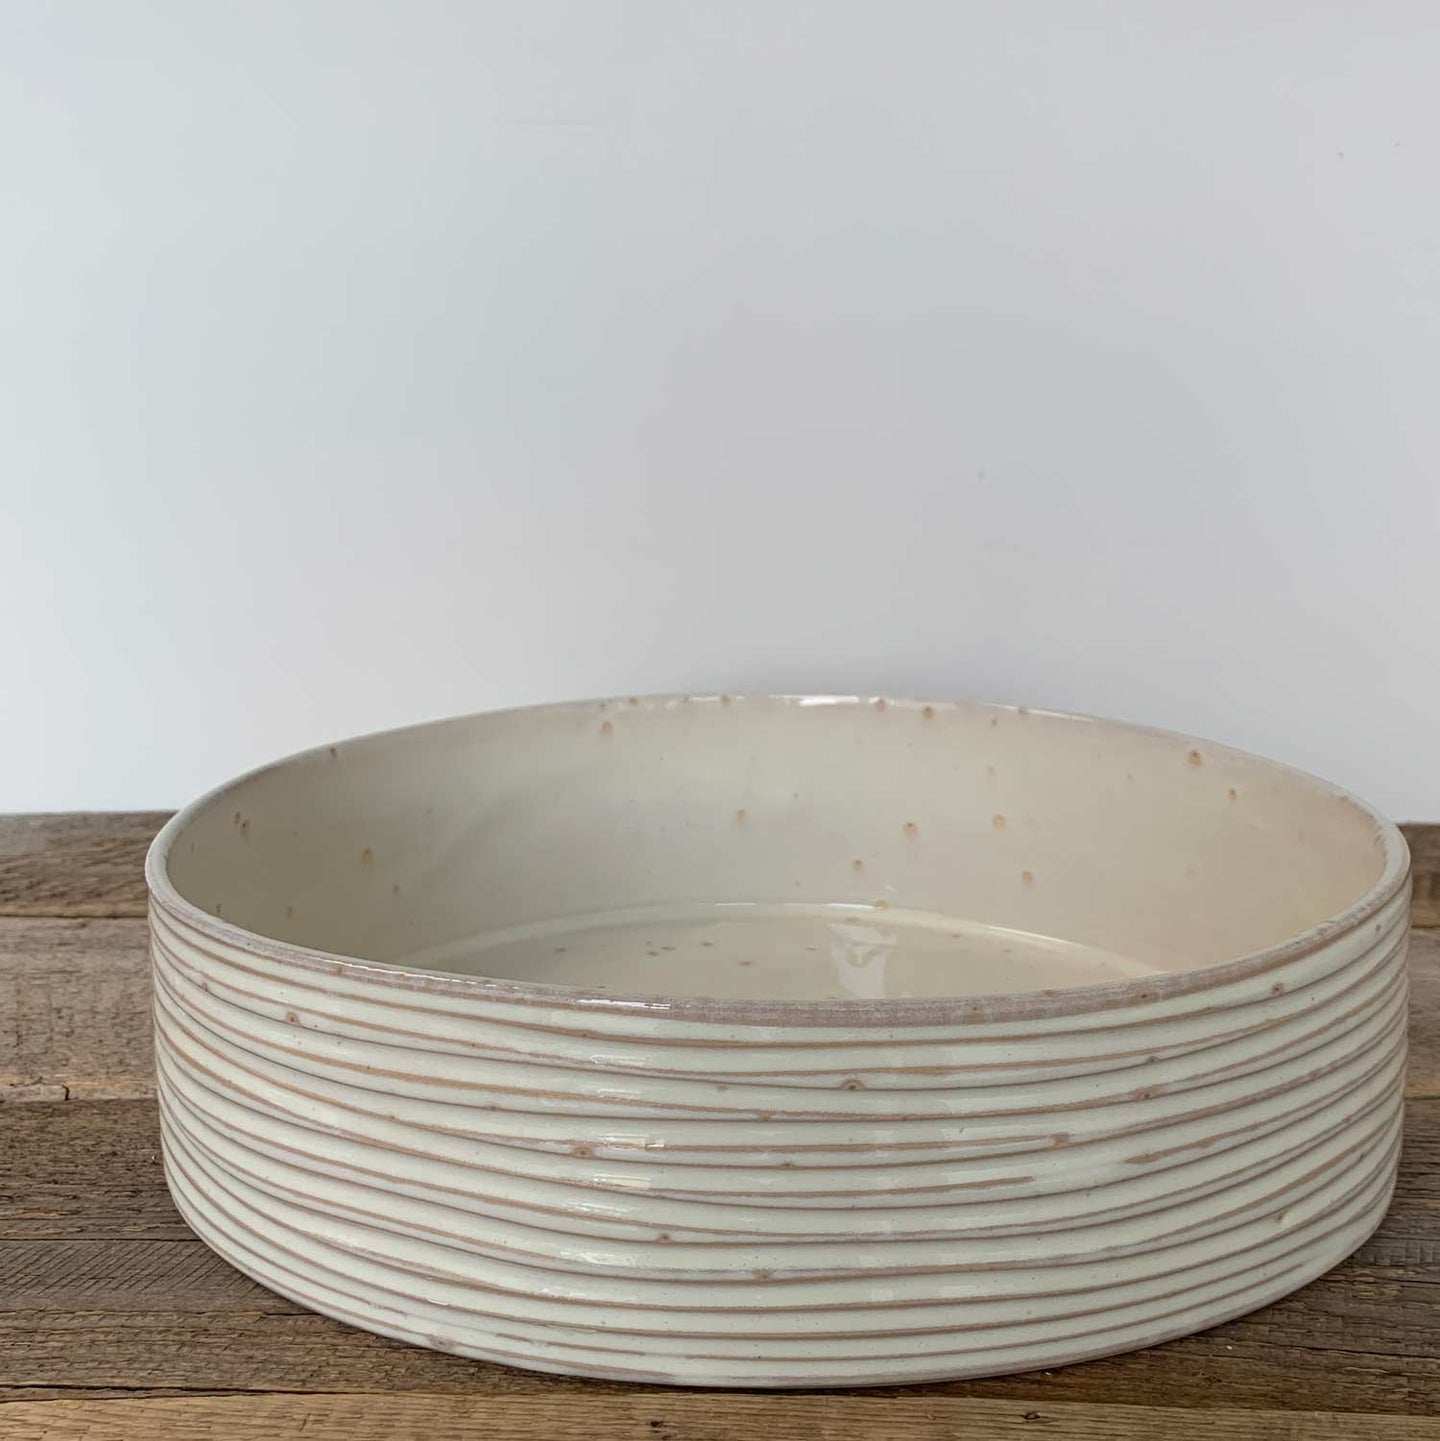 CYLINDER BOWL IN OATMEAL WITH WAVES-LARGE